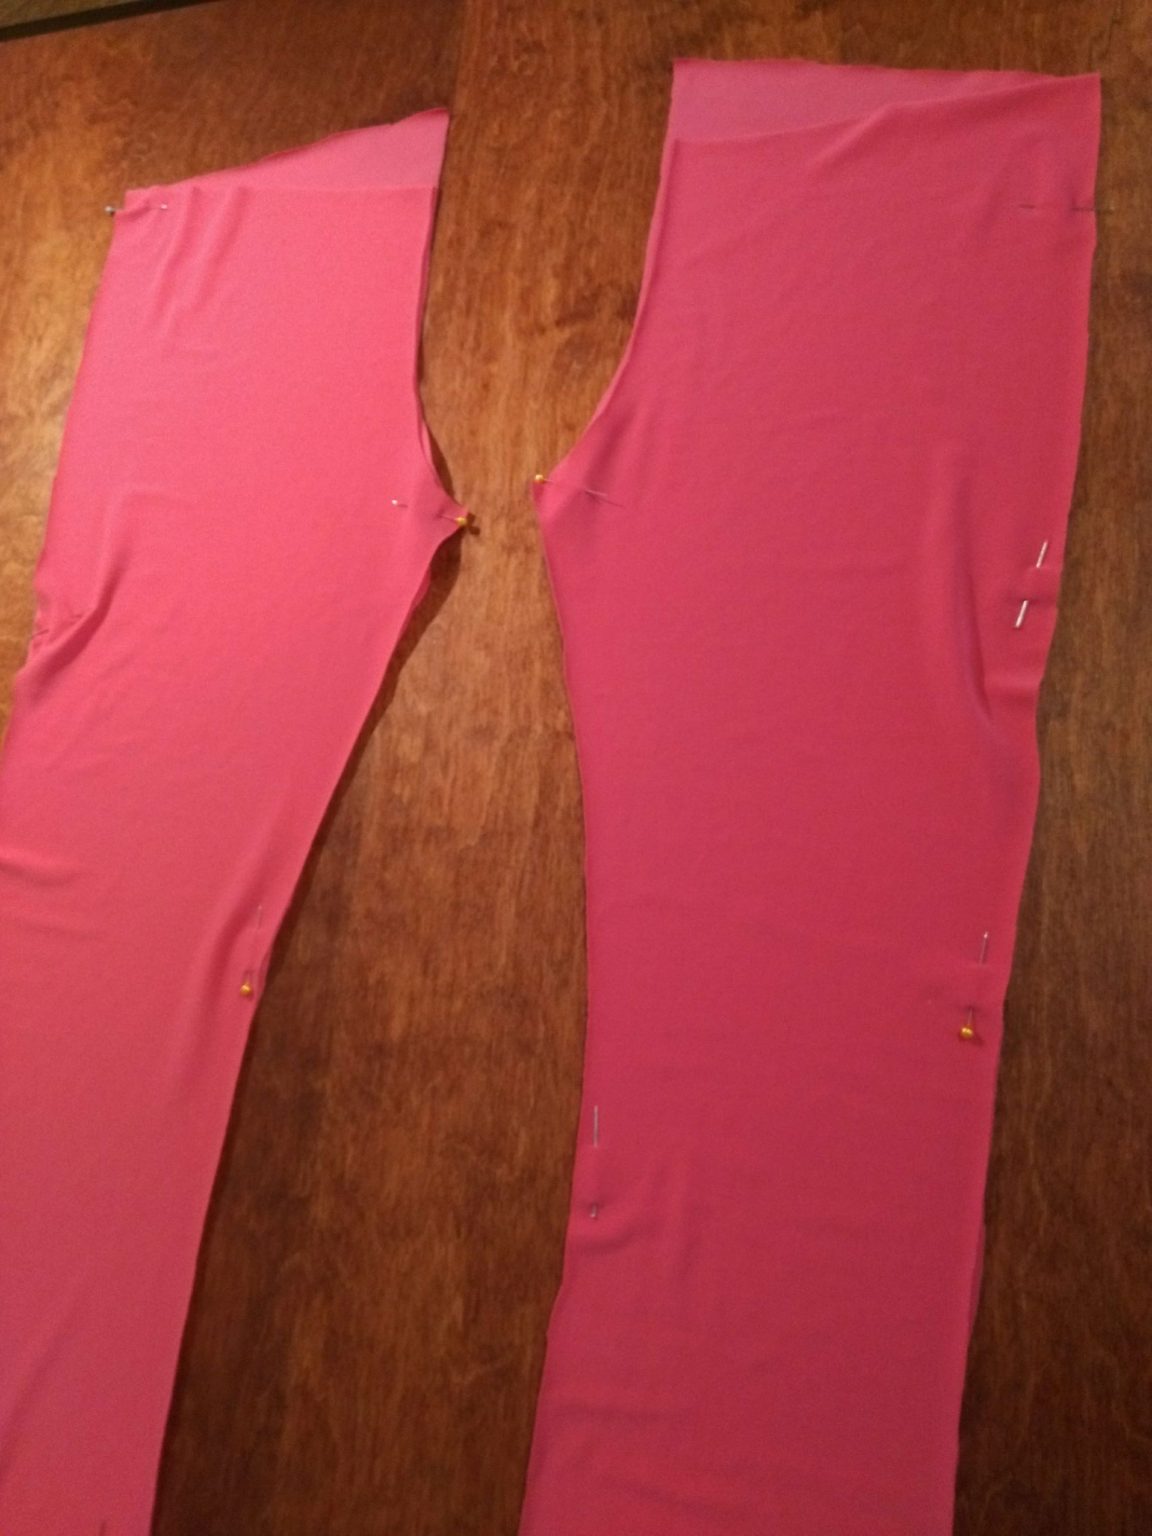 Sew leggings from an existing pair | Elise's Sewing Studio